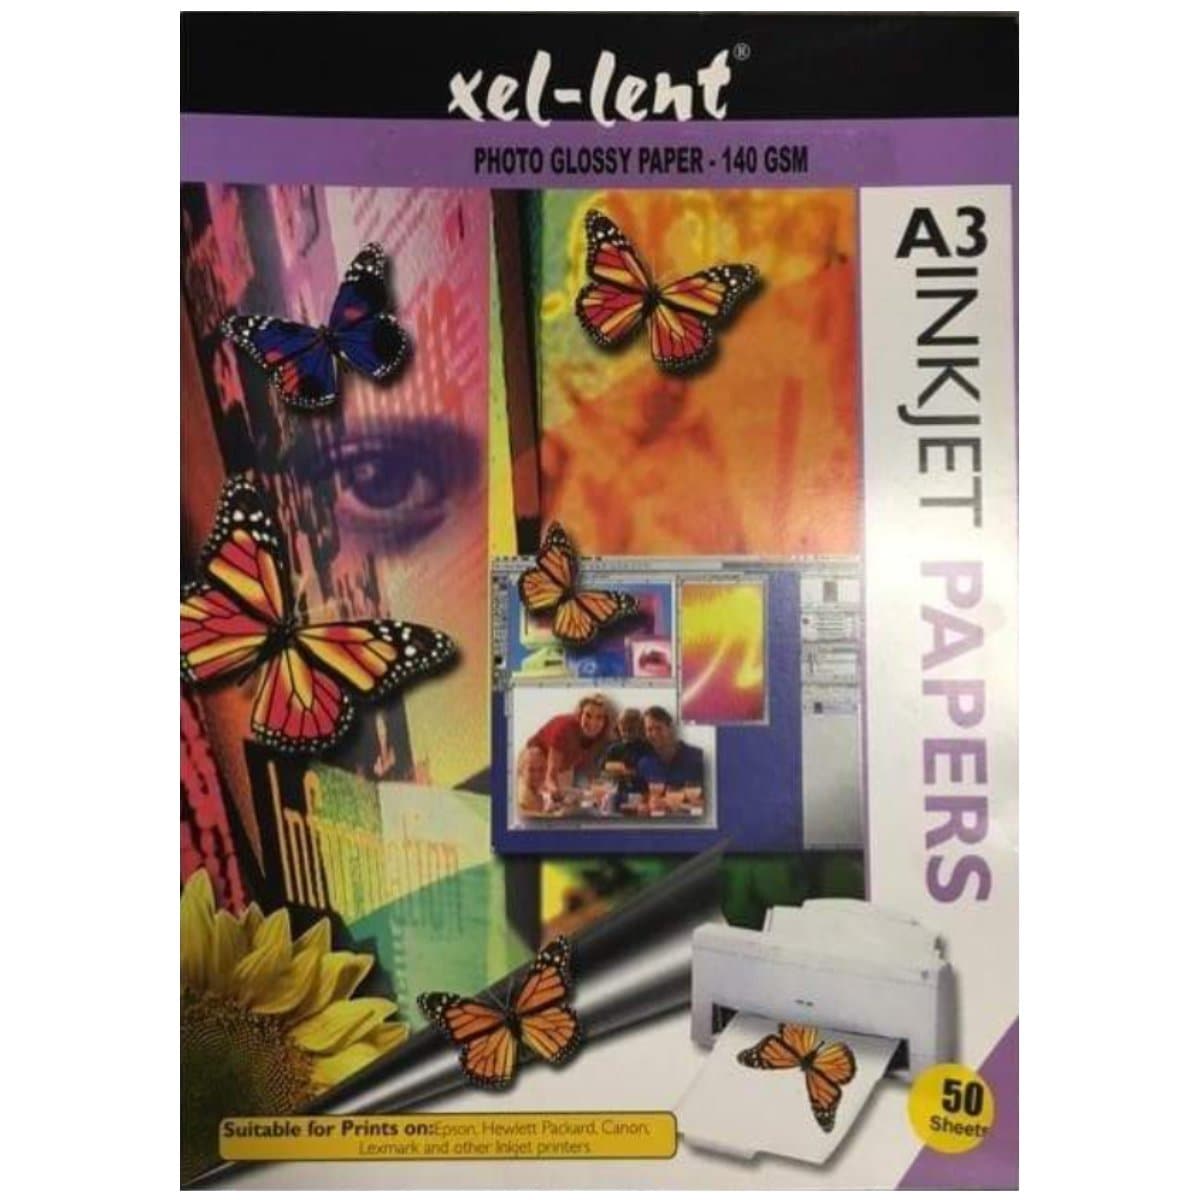 xel-lent Inkjet Glossy Photo Paper, A3, 140gsm, 50/pack